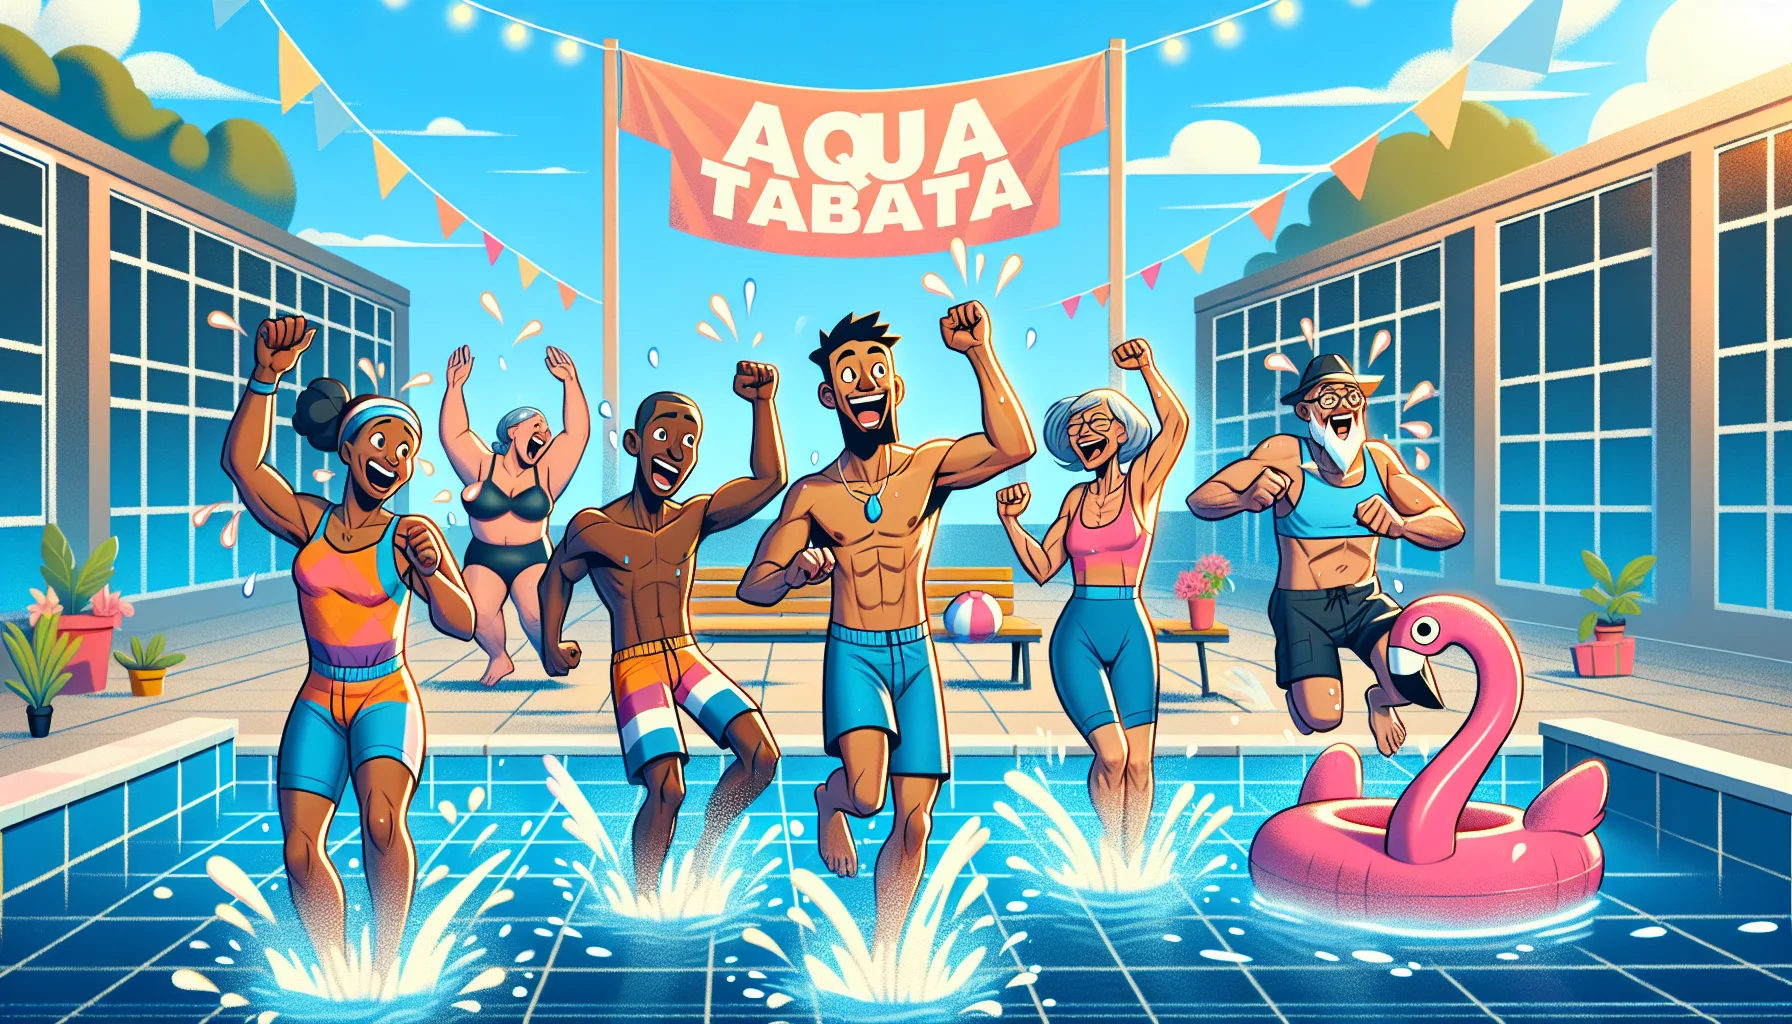 Craft a humorous and enticing scene inspired by aqua tabata. Visualize a community pool brightly lit under the summer sun, brimming with excitement and fun. Show a diverse group of participants including a Black man, a Caucasian woman, a Middle-Eastern elderly man, and a South Asian teenager, all splashing water in sync to an invisible beat. Add a sense of comedy with an overly enthusiastic instructor, a confused flamingo pool float caught in the aquatic upheaval, and a big sign in the background saying: 'Aqua Tabata: The Best Way to Make a Splash!'. Use this scene to inspire people to engage more in exercise.